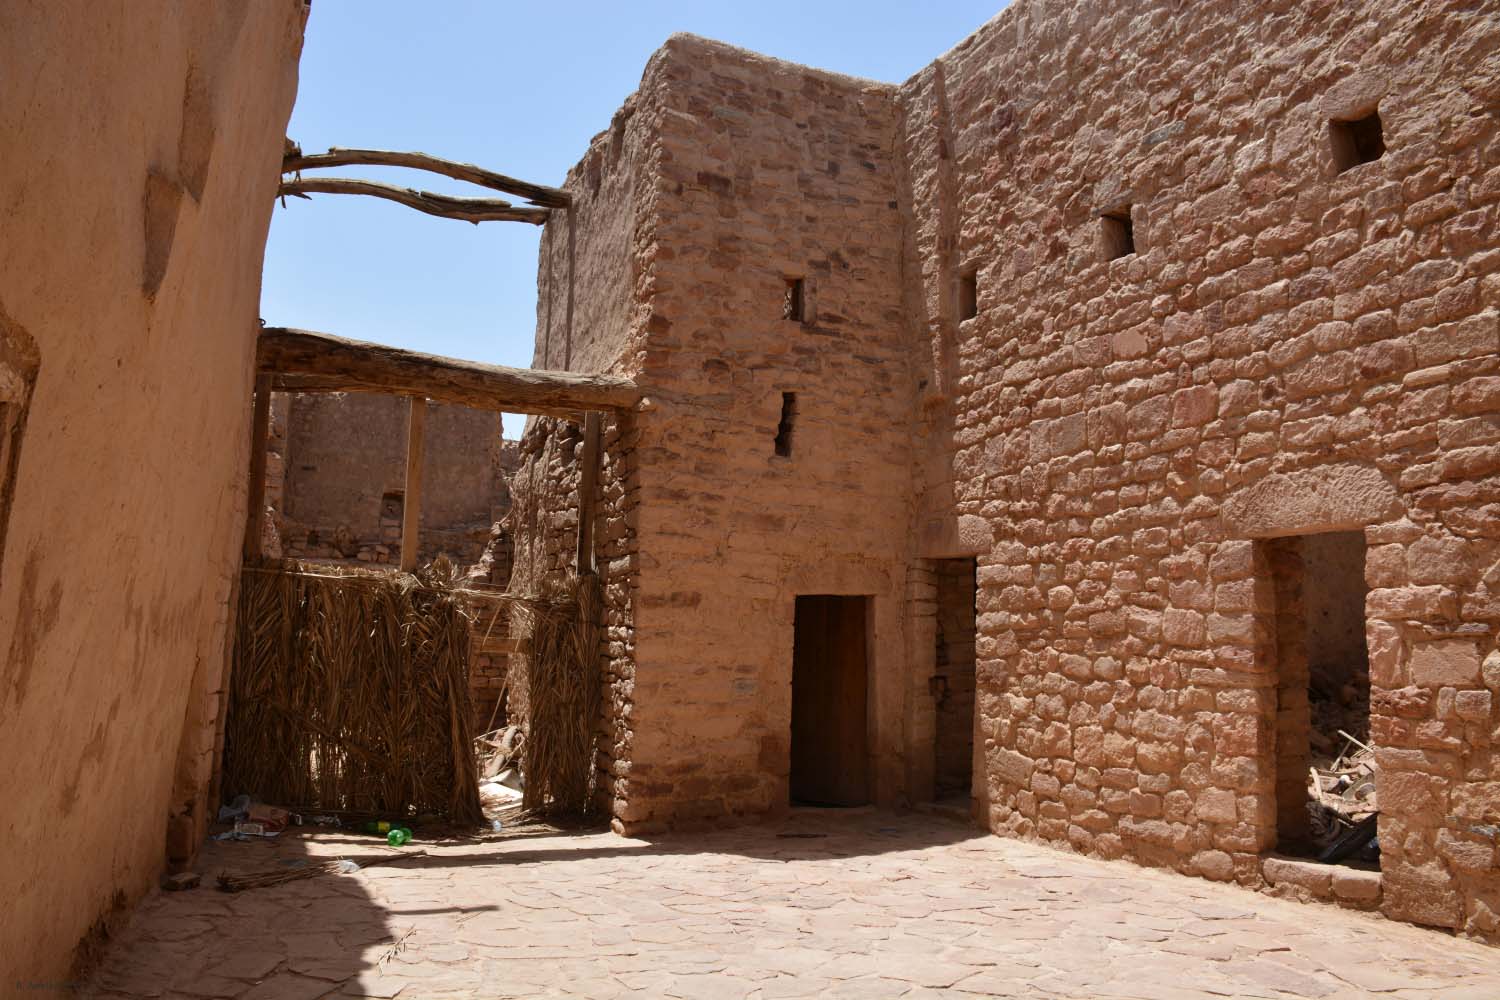 al-Ula - Street view to a wooden gate in old town